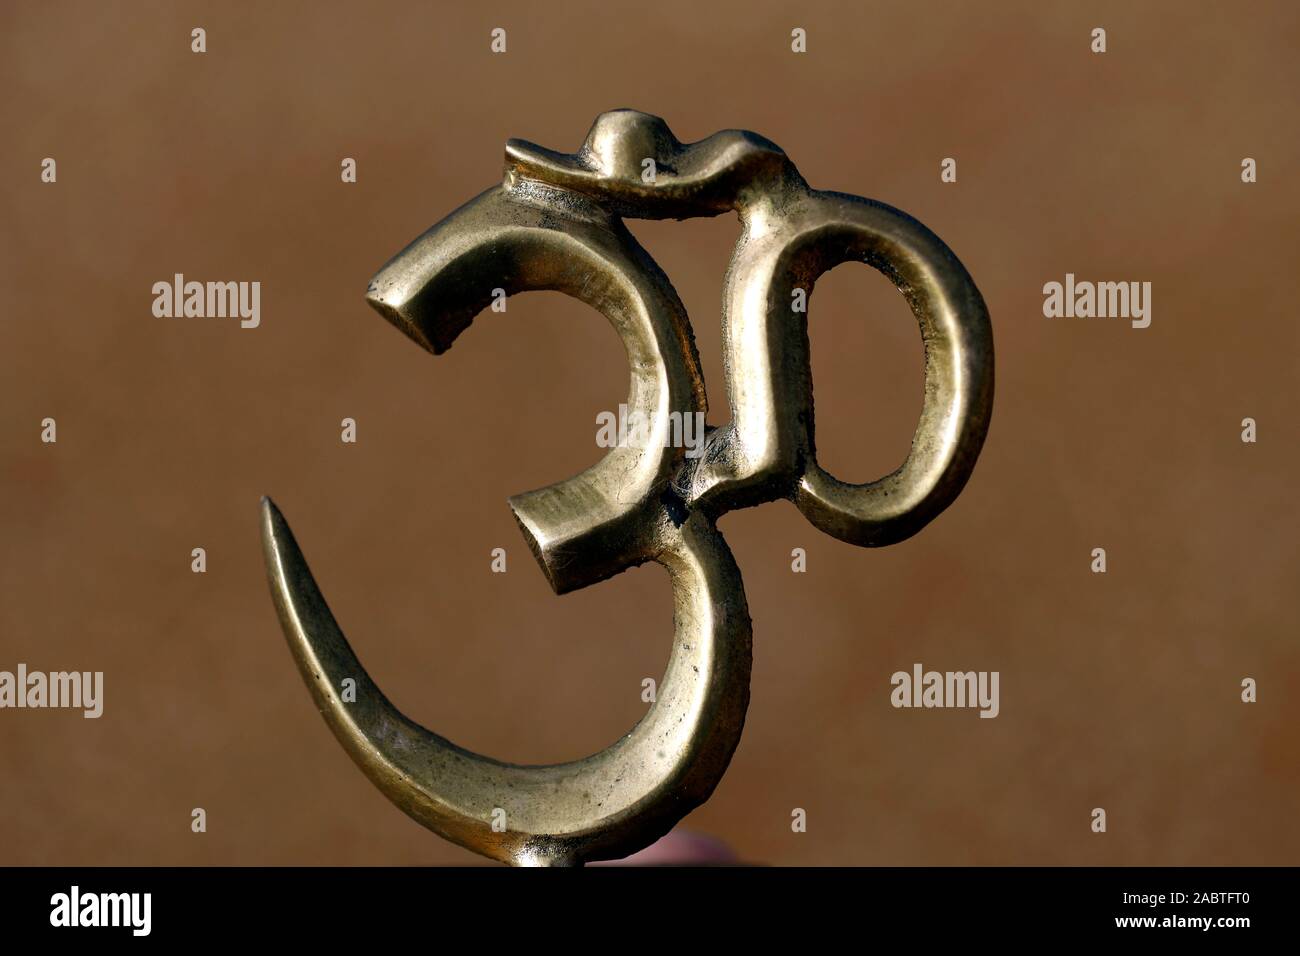 The Om or Aum symbol of Hinduism and Buddhism. Stock Photo